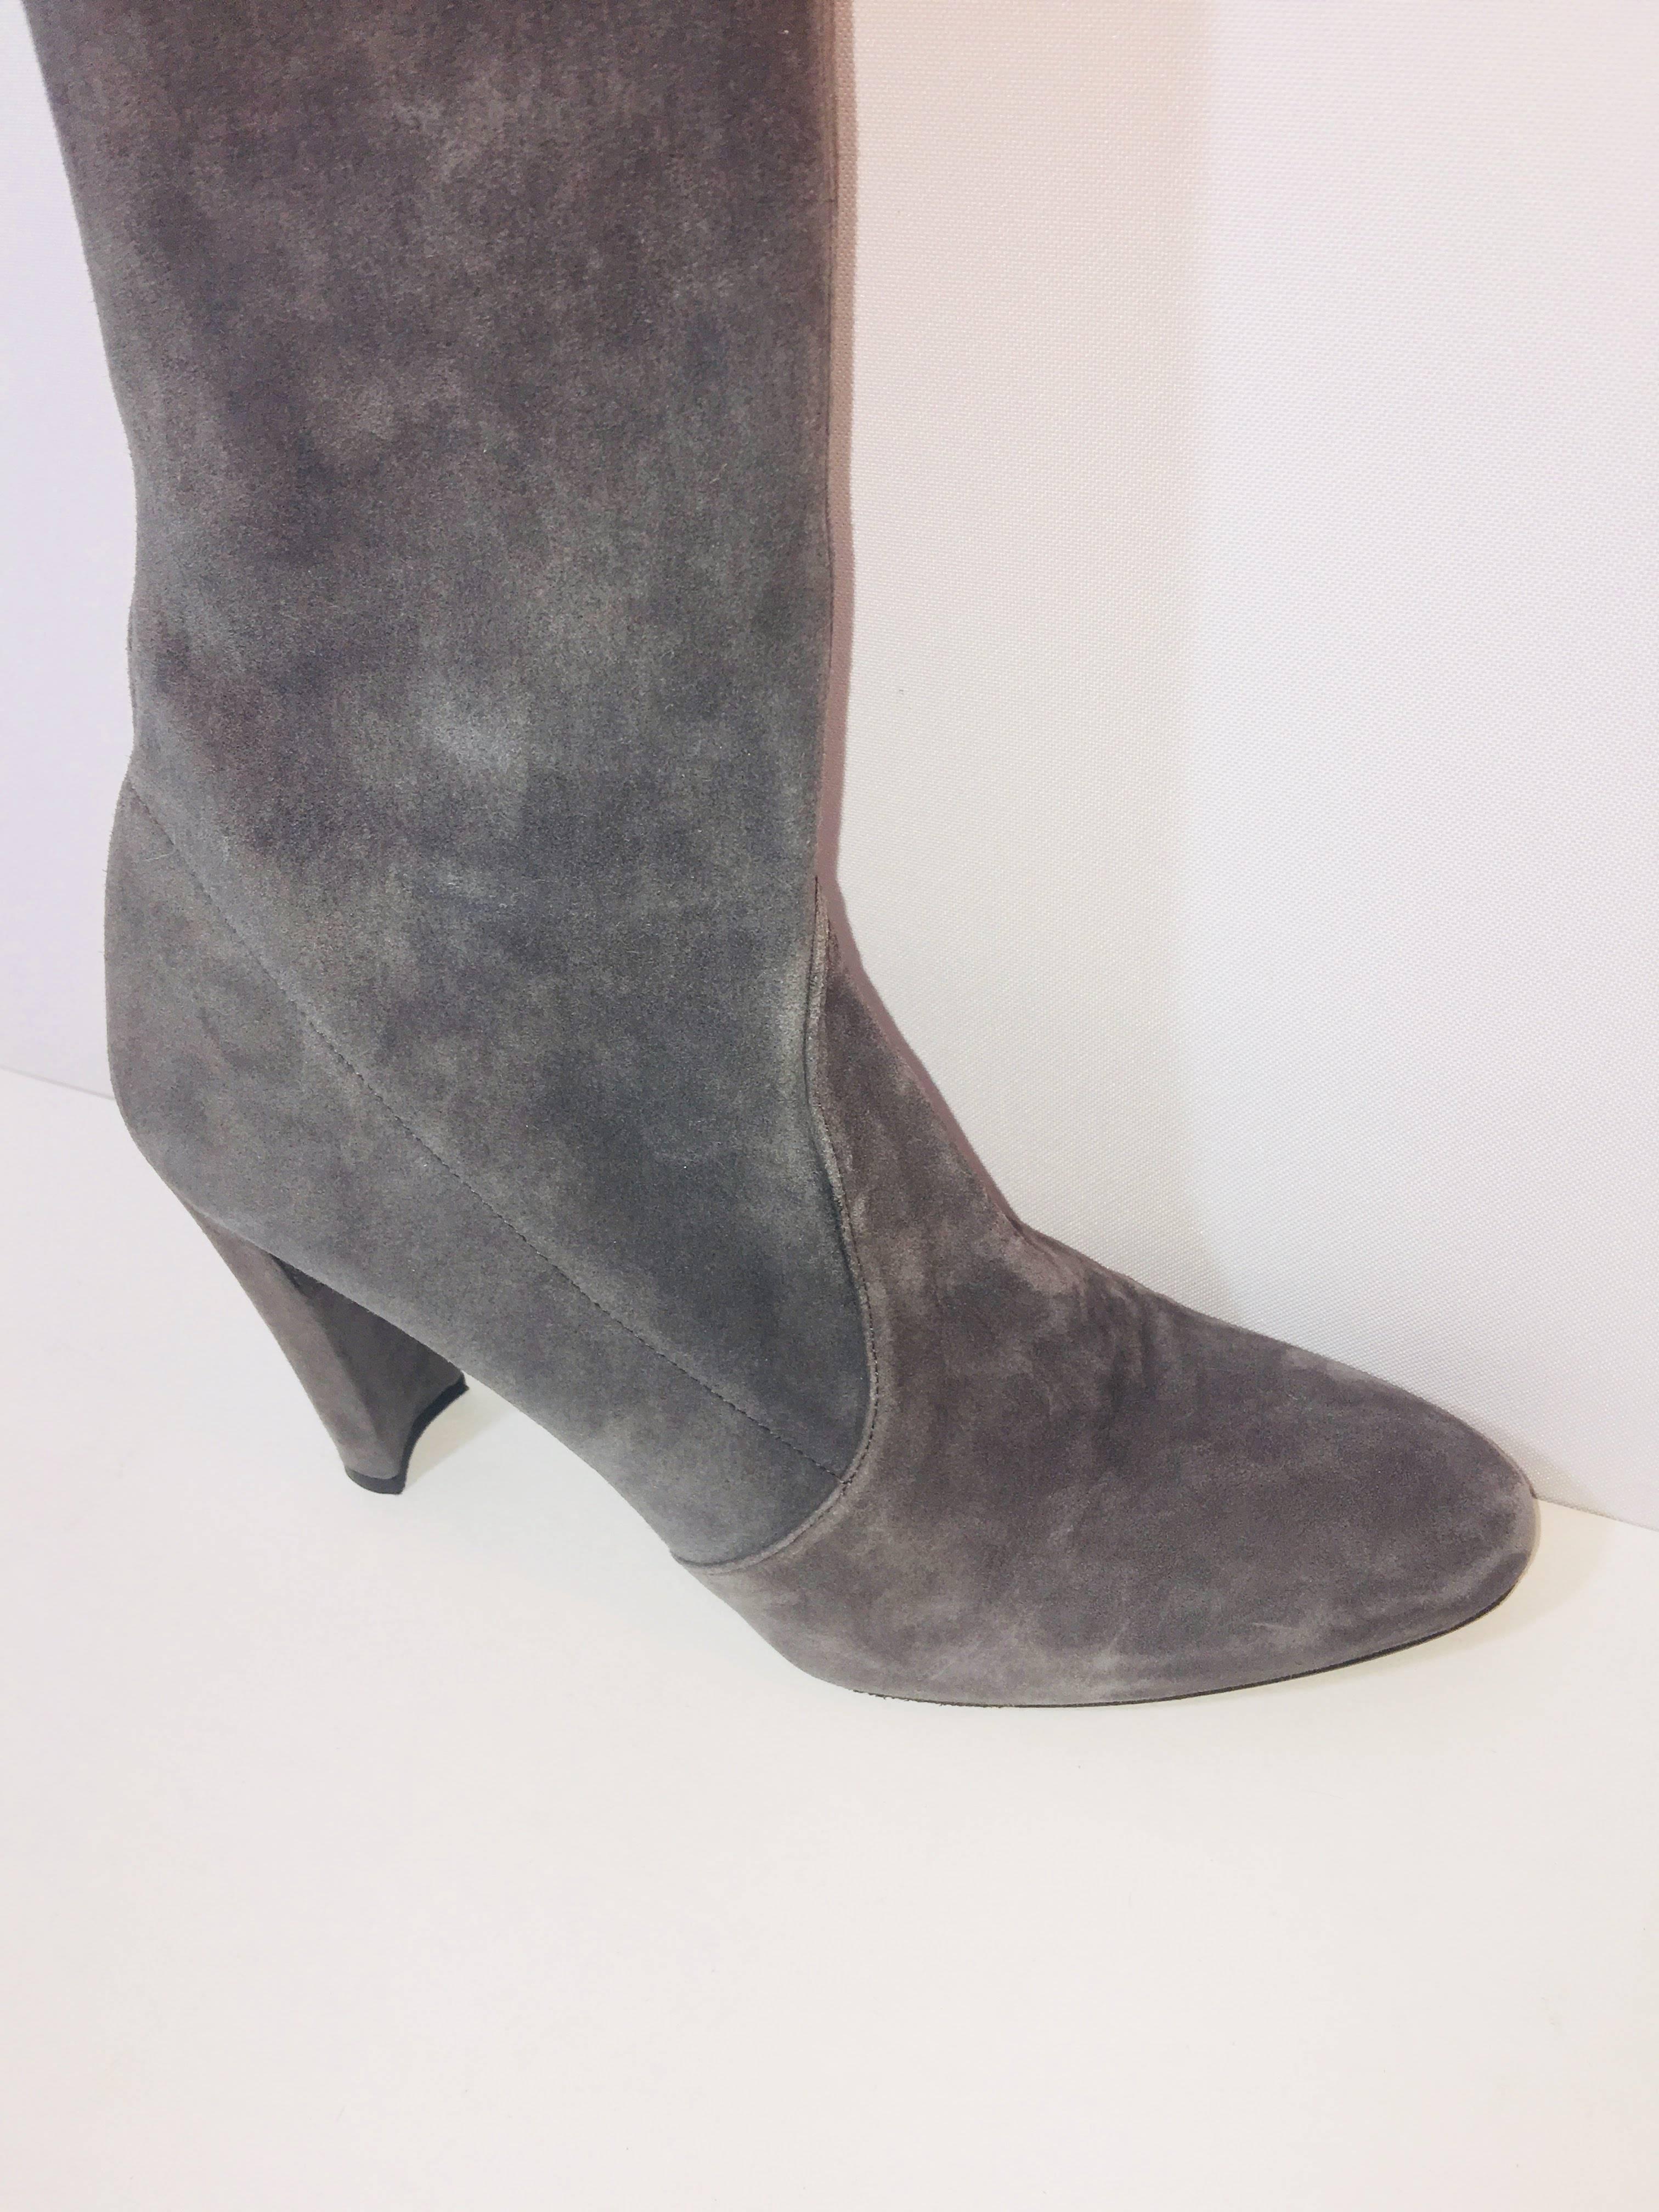 Stuart Weitzman Thigh-High Boots in Grey Suede with Lace up Detail